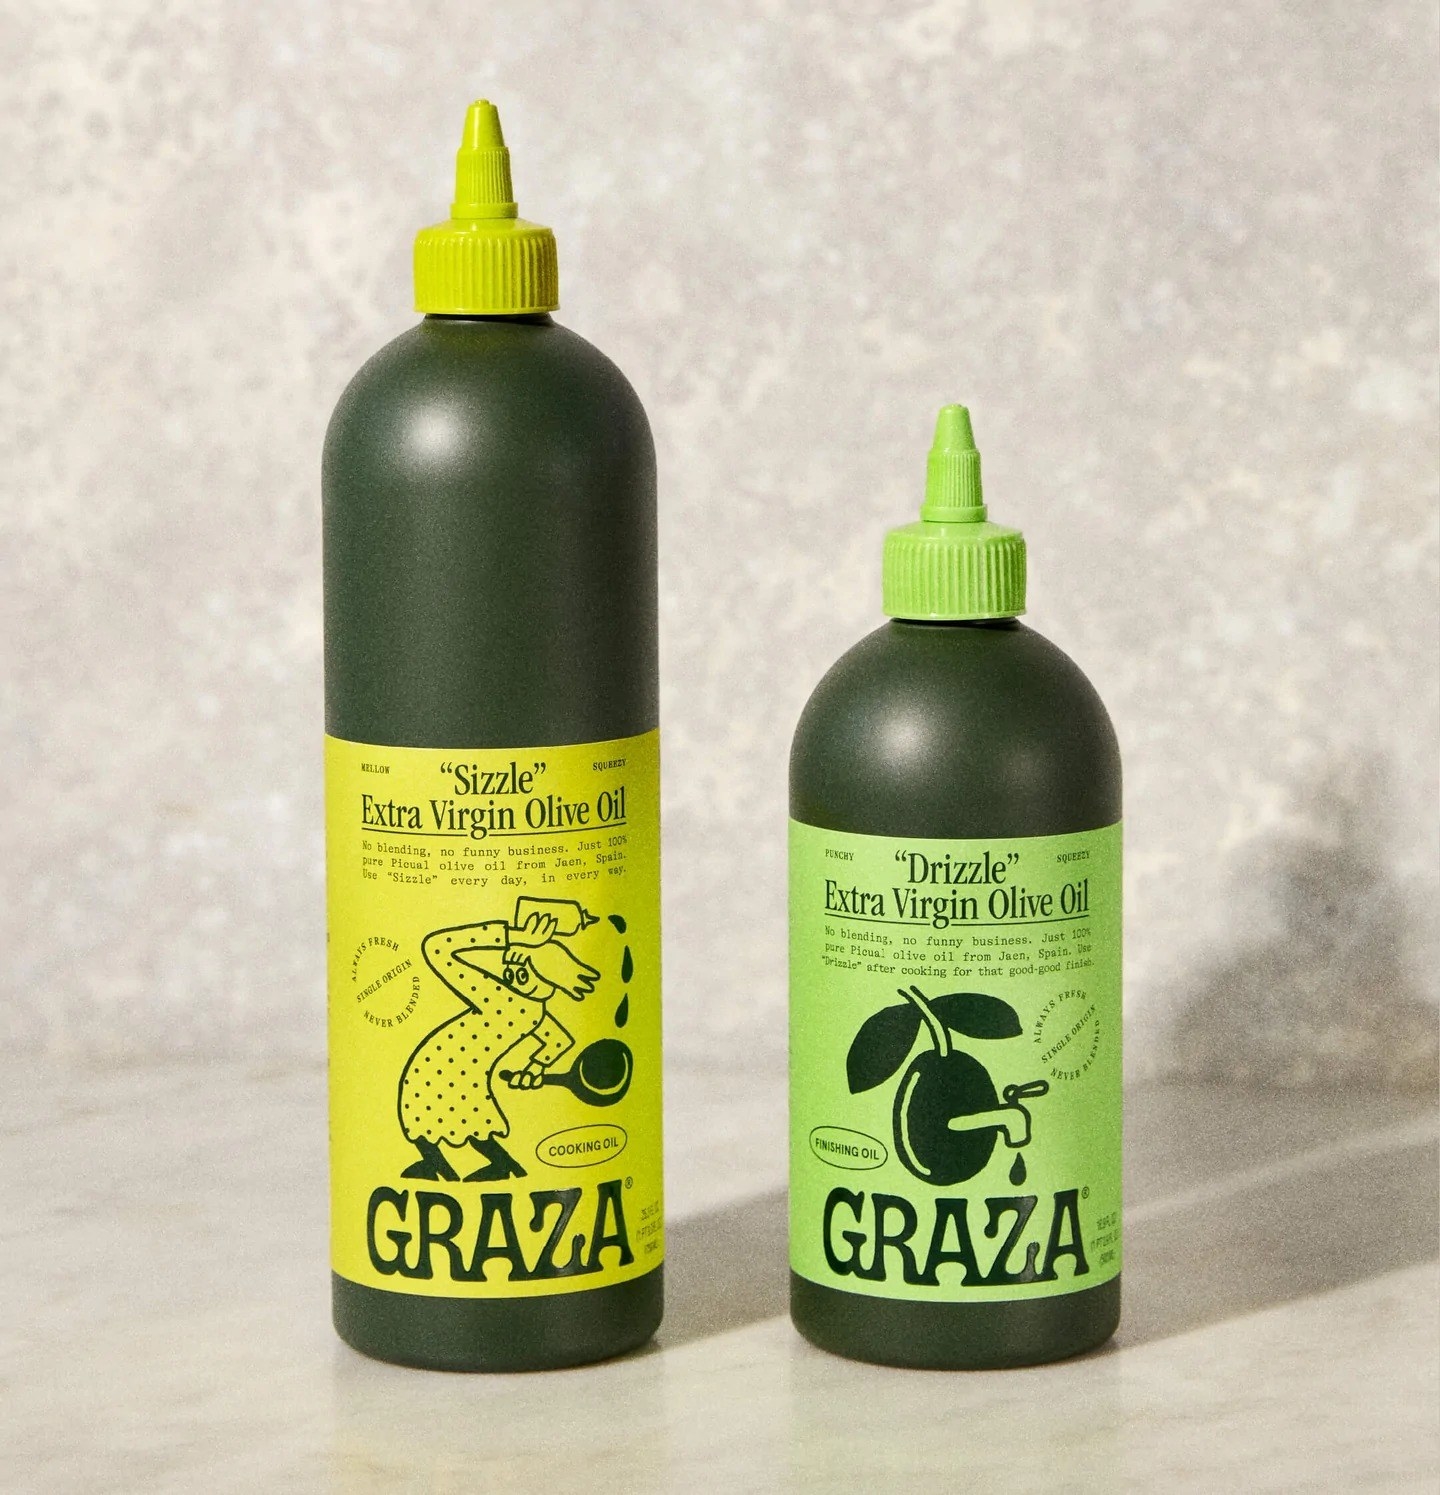 The bottles: a larger for cooking and a smaller for finishing